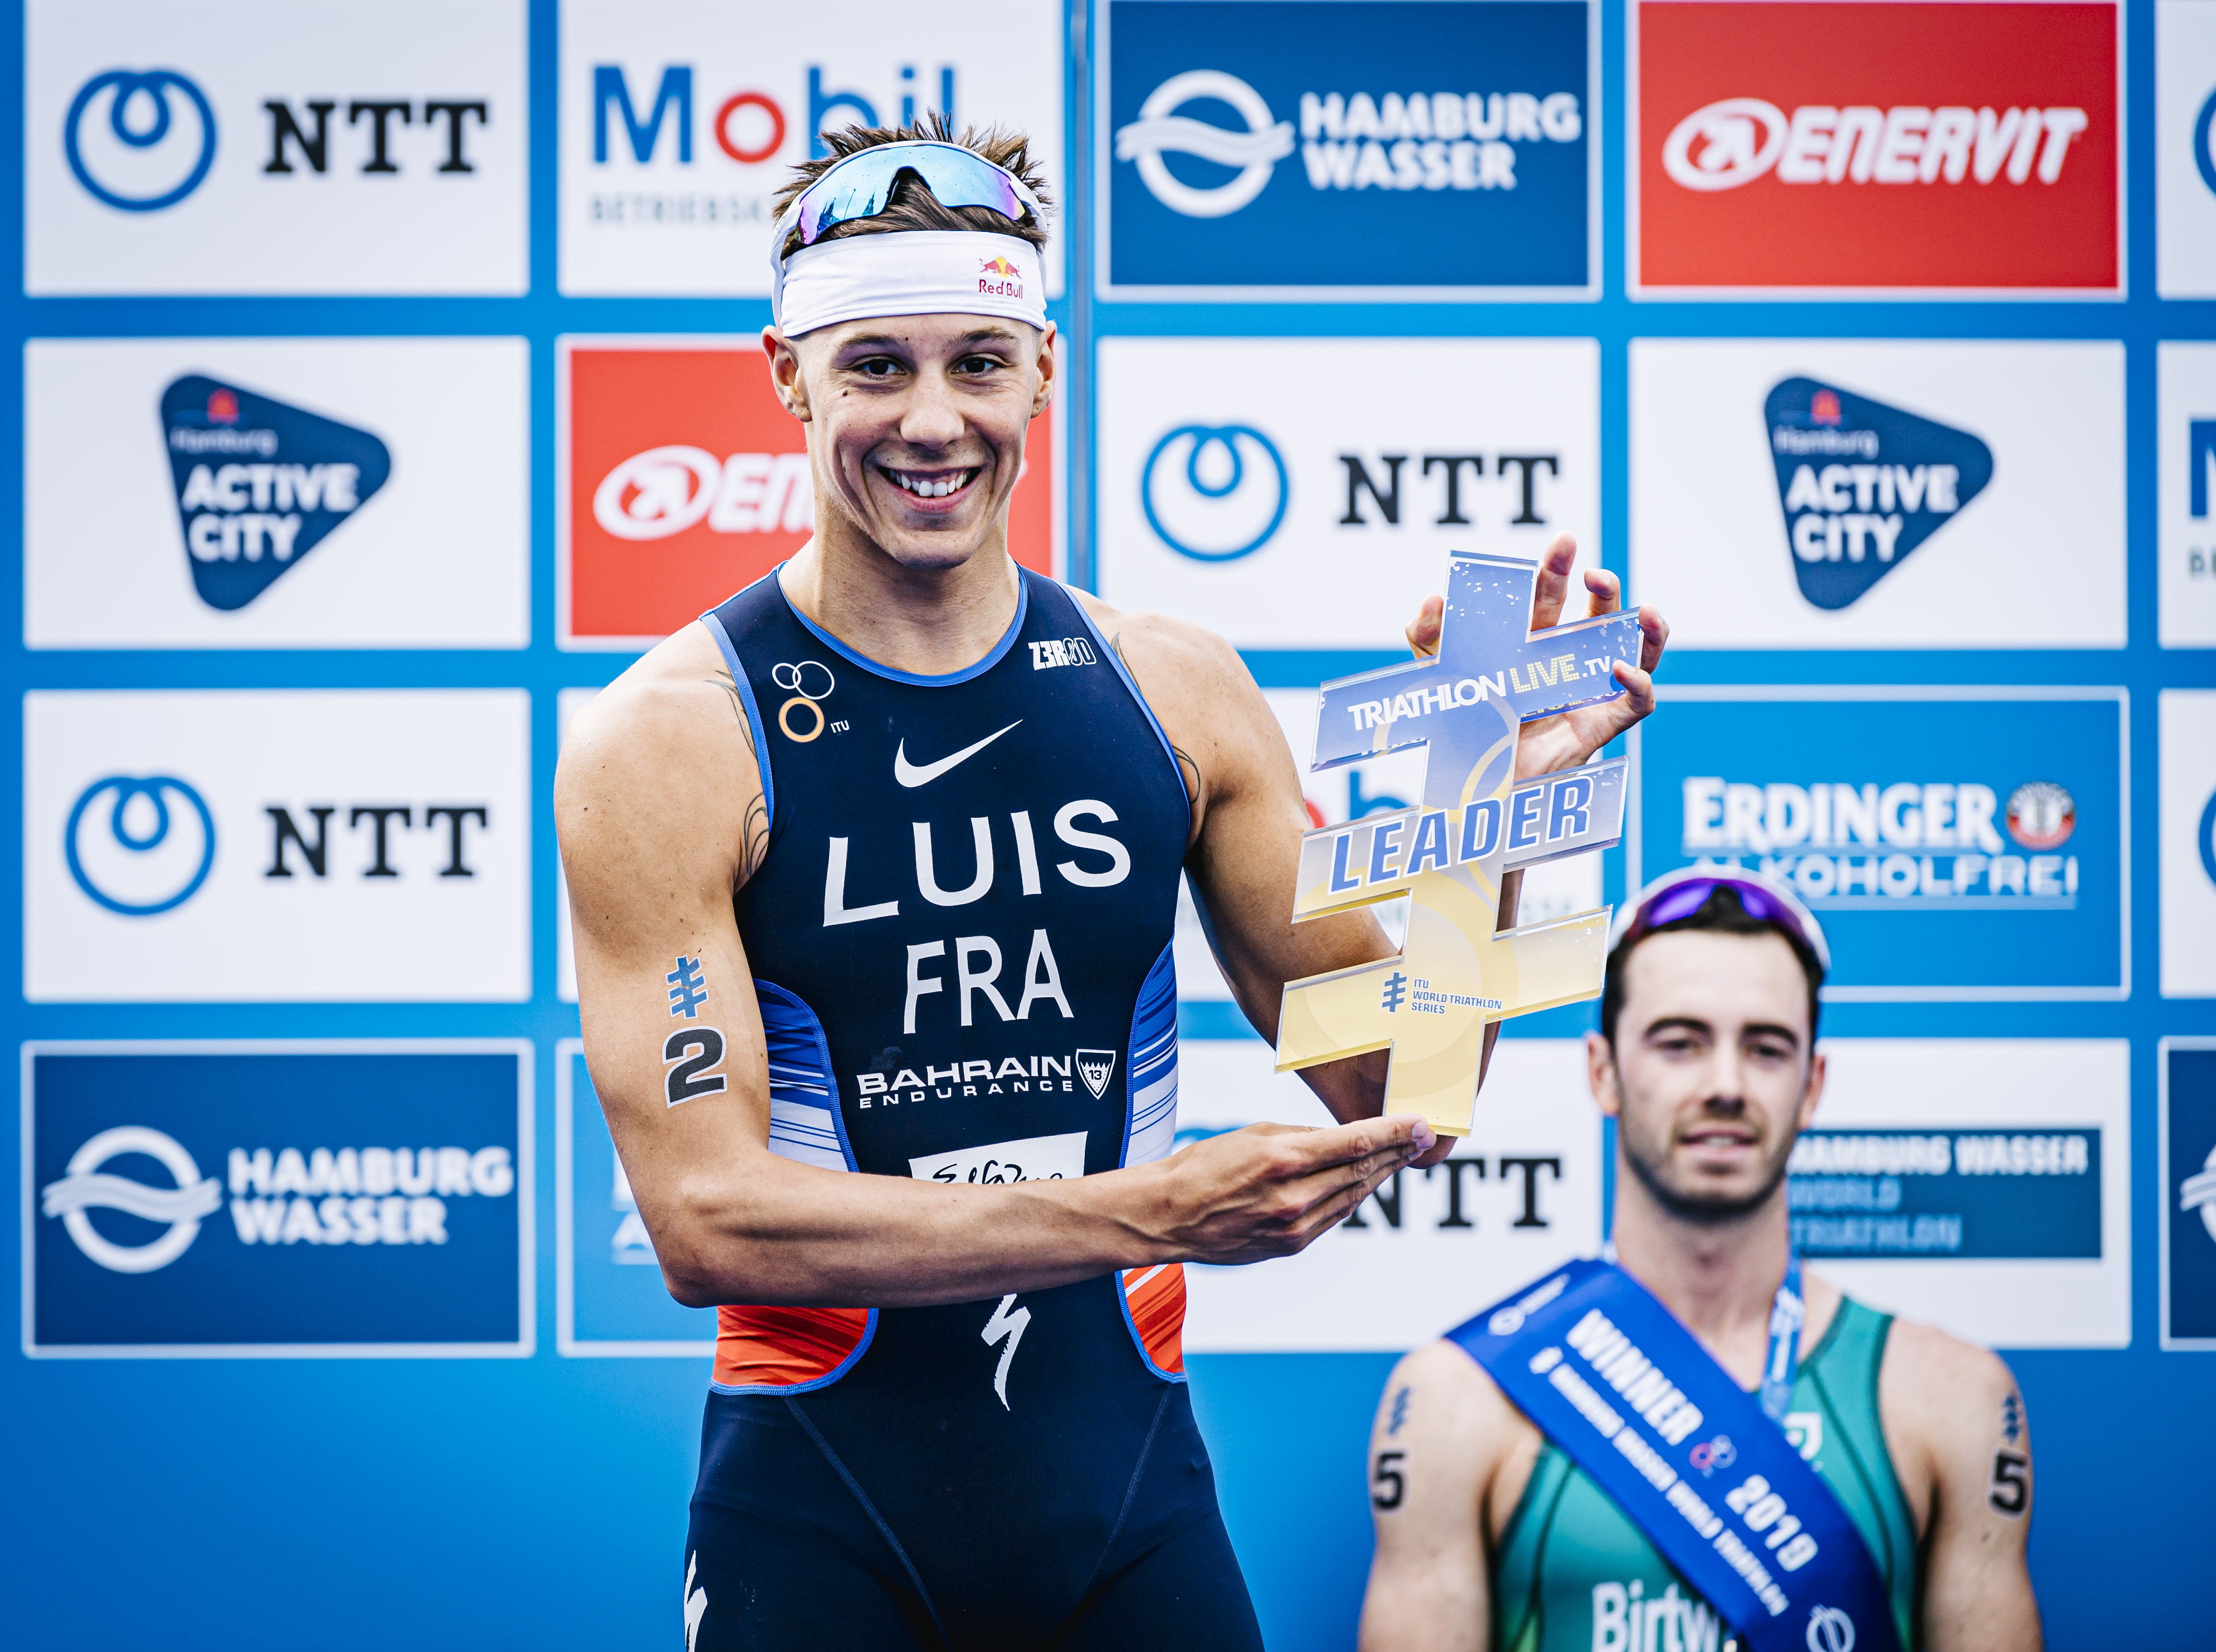 HAMBURG, GERMANY - JULY 06: (EDITORS NOTE: Image has been digitally enhanced) World Triathlon overall leader Vincent Luis of France is seen during the ITU World Triathlon Elite women sprint race on July 06, 2019 in Hamburg, Germany. (Photo by Alexander Scheuber/Getty Images for IRONMAN)